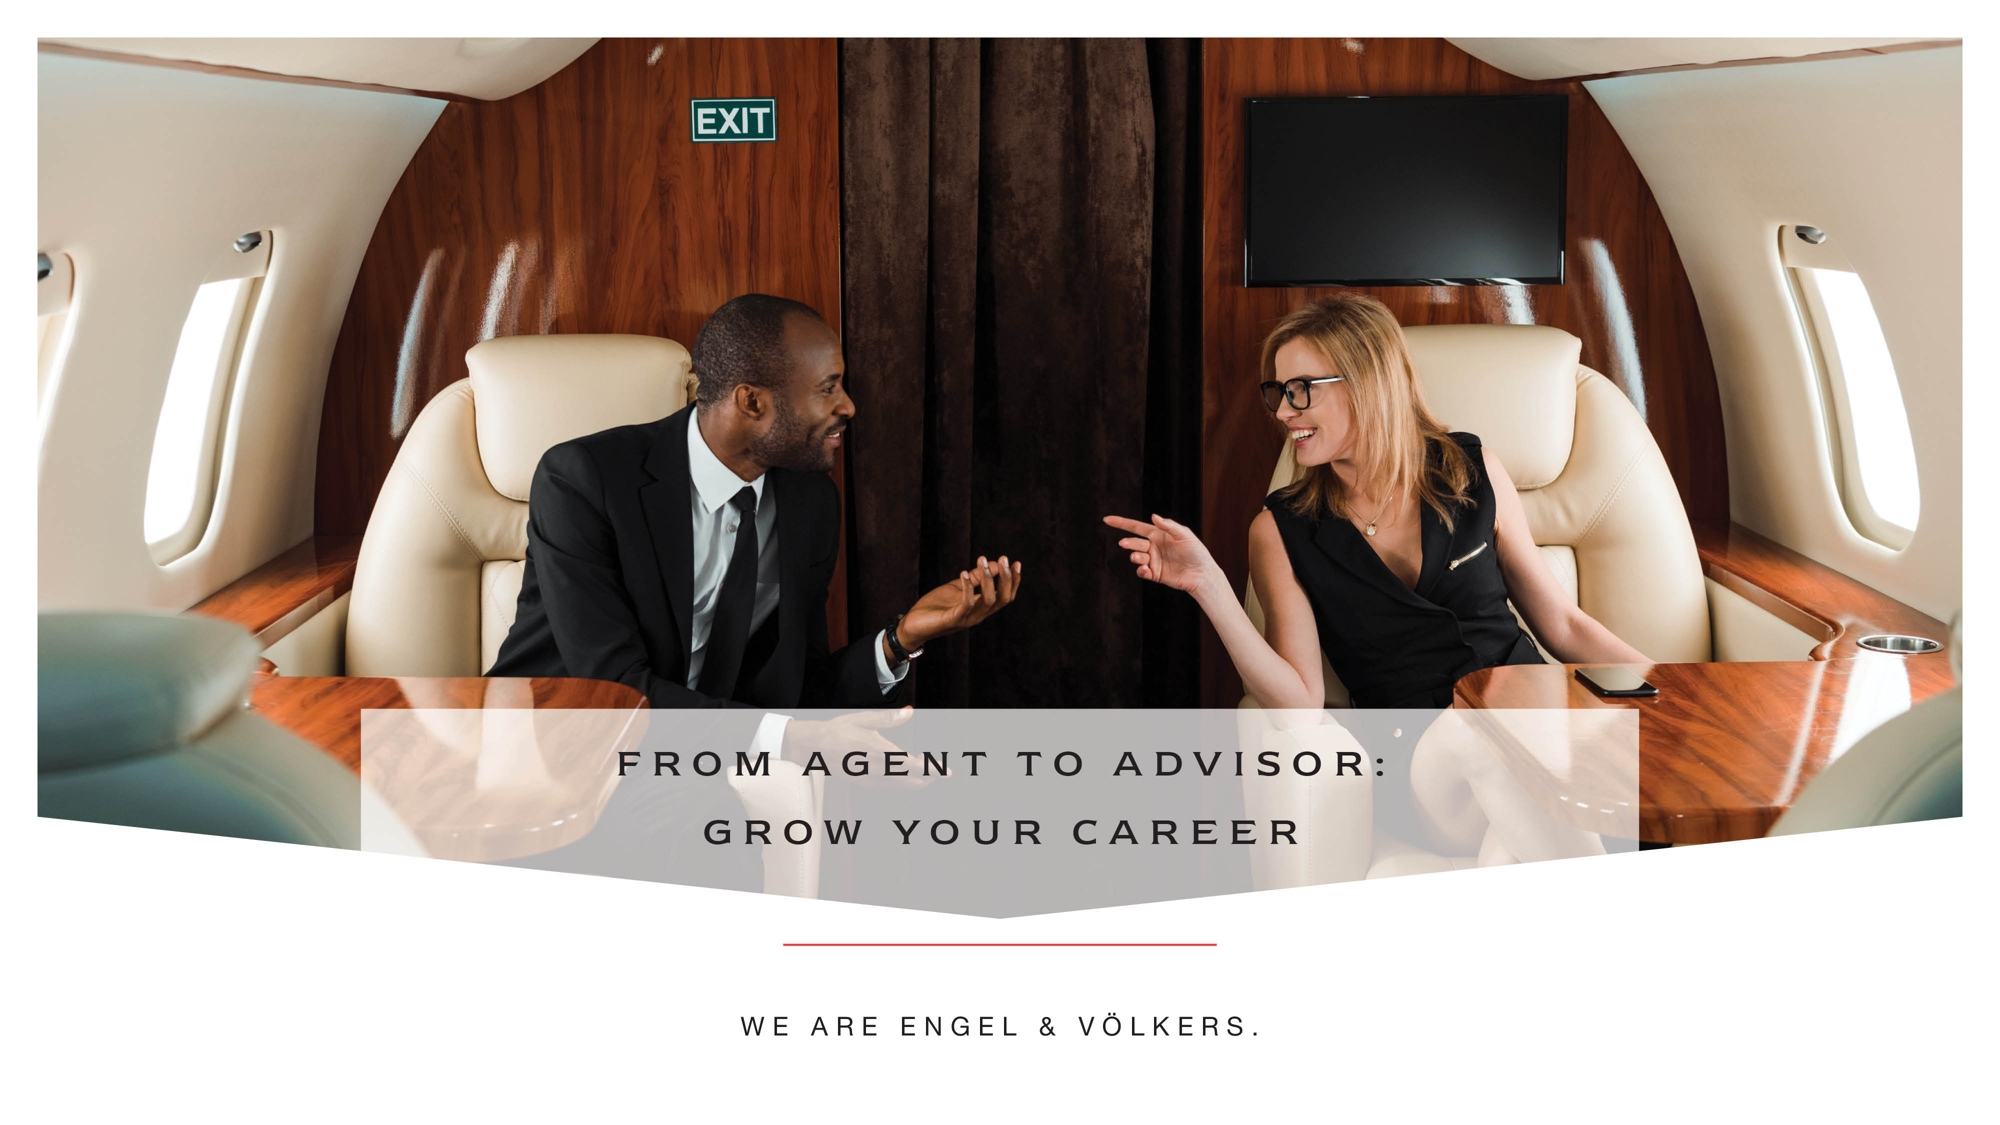 From Agent to Advisor